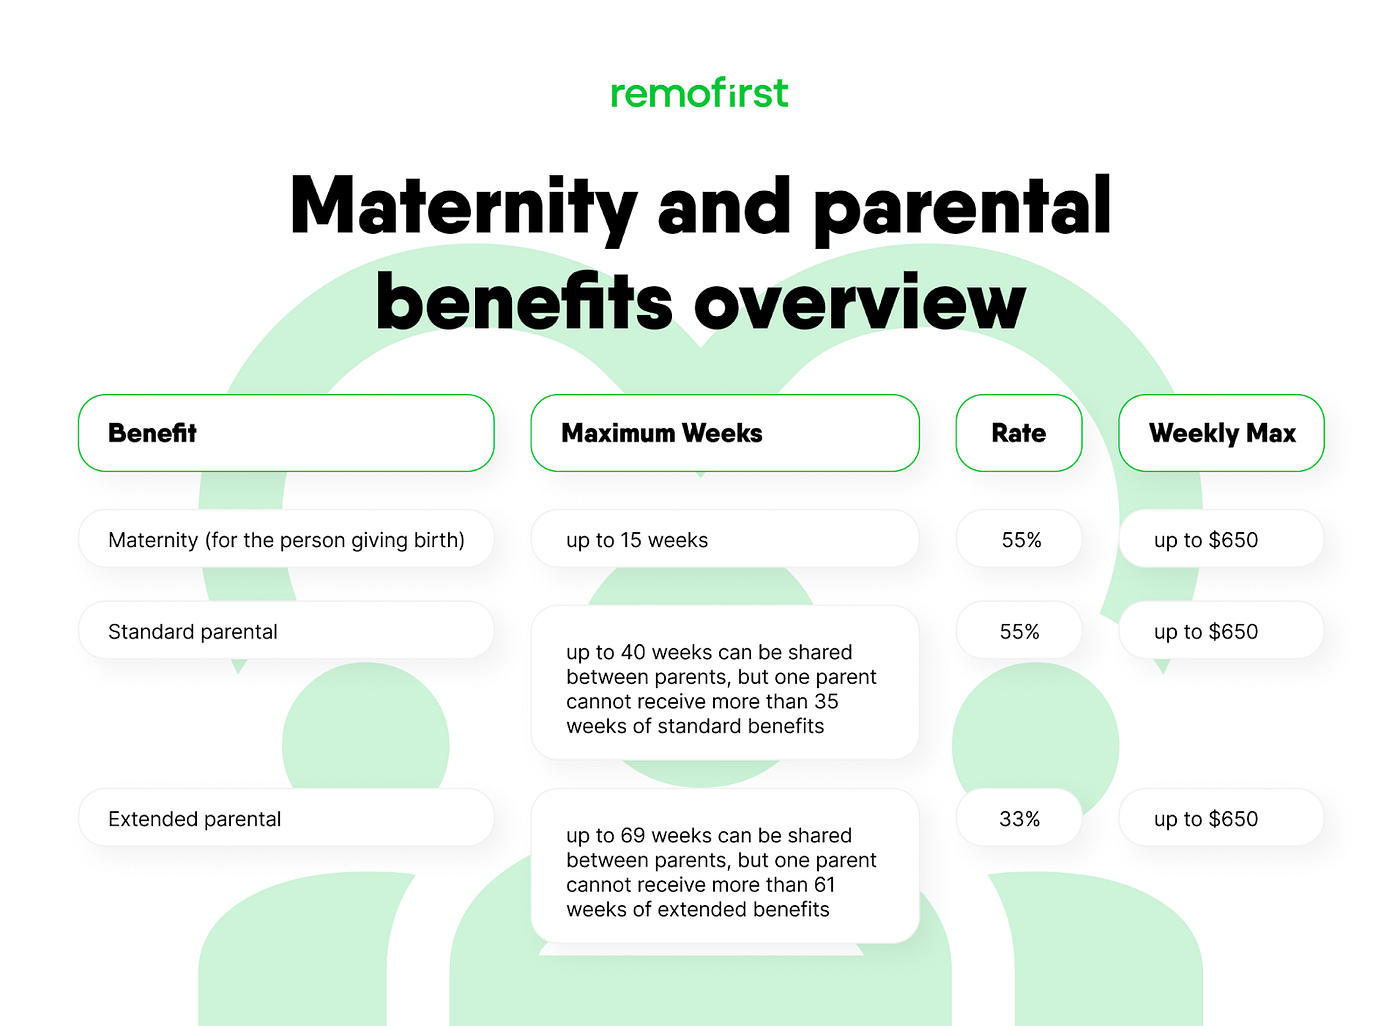 Earlier access to maternity benefits 